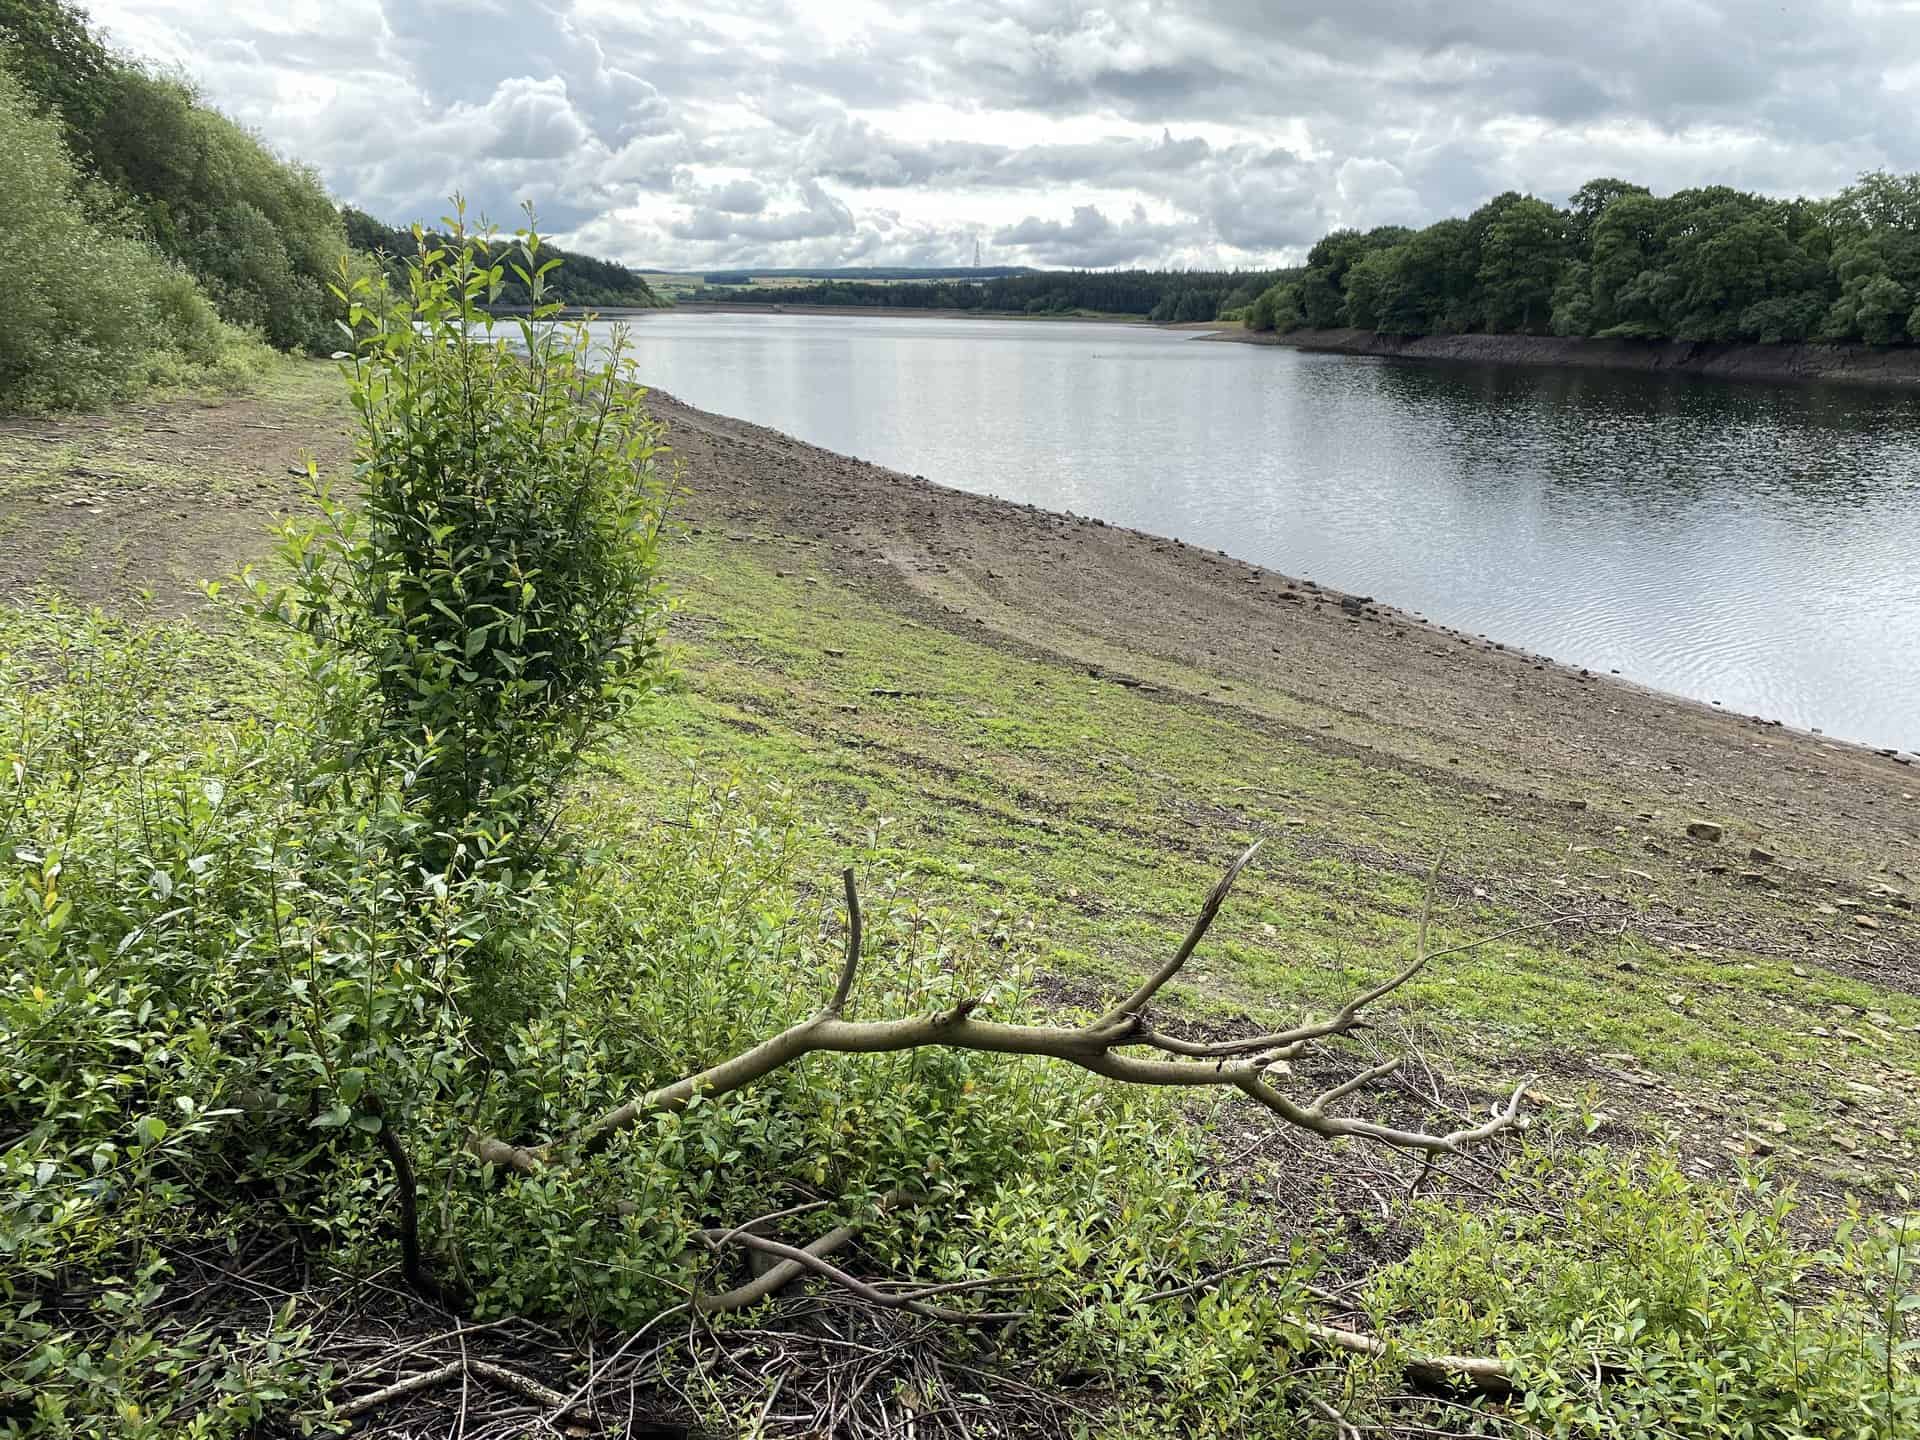 The south-eastward view from Fewston Reservoir's northern boundary towards Fewston Embankment.